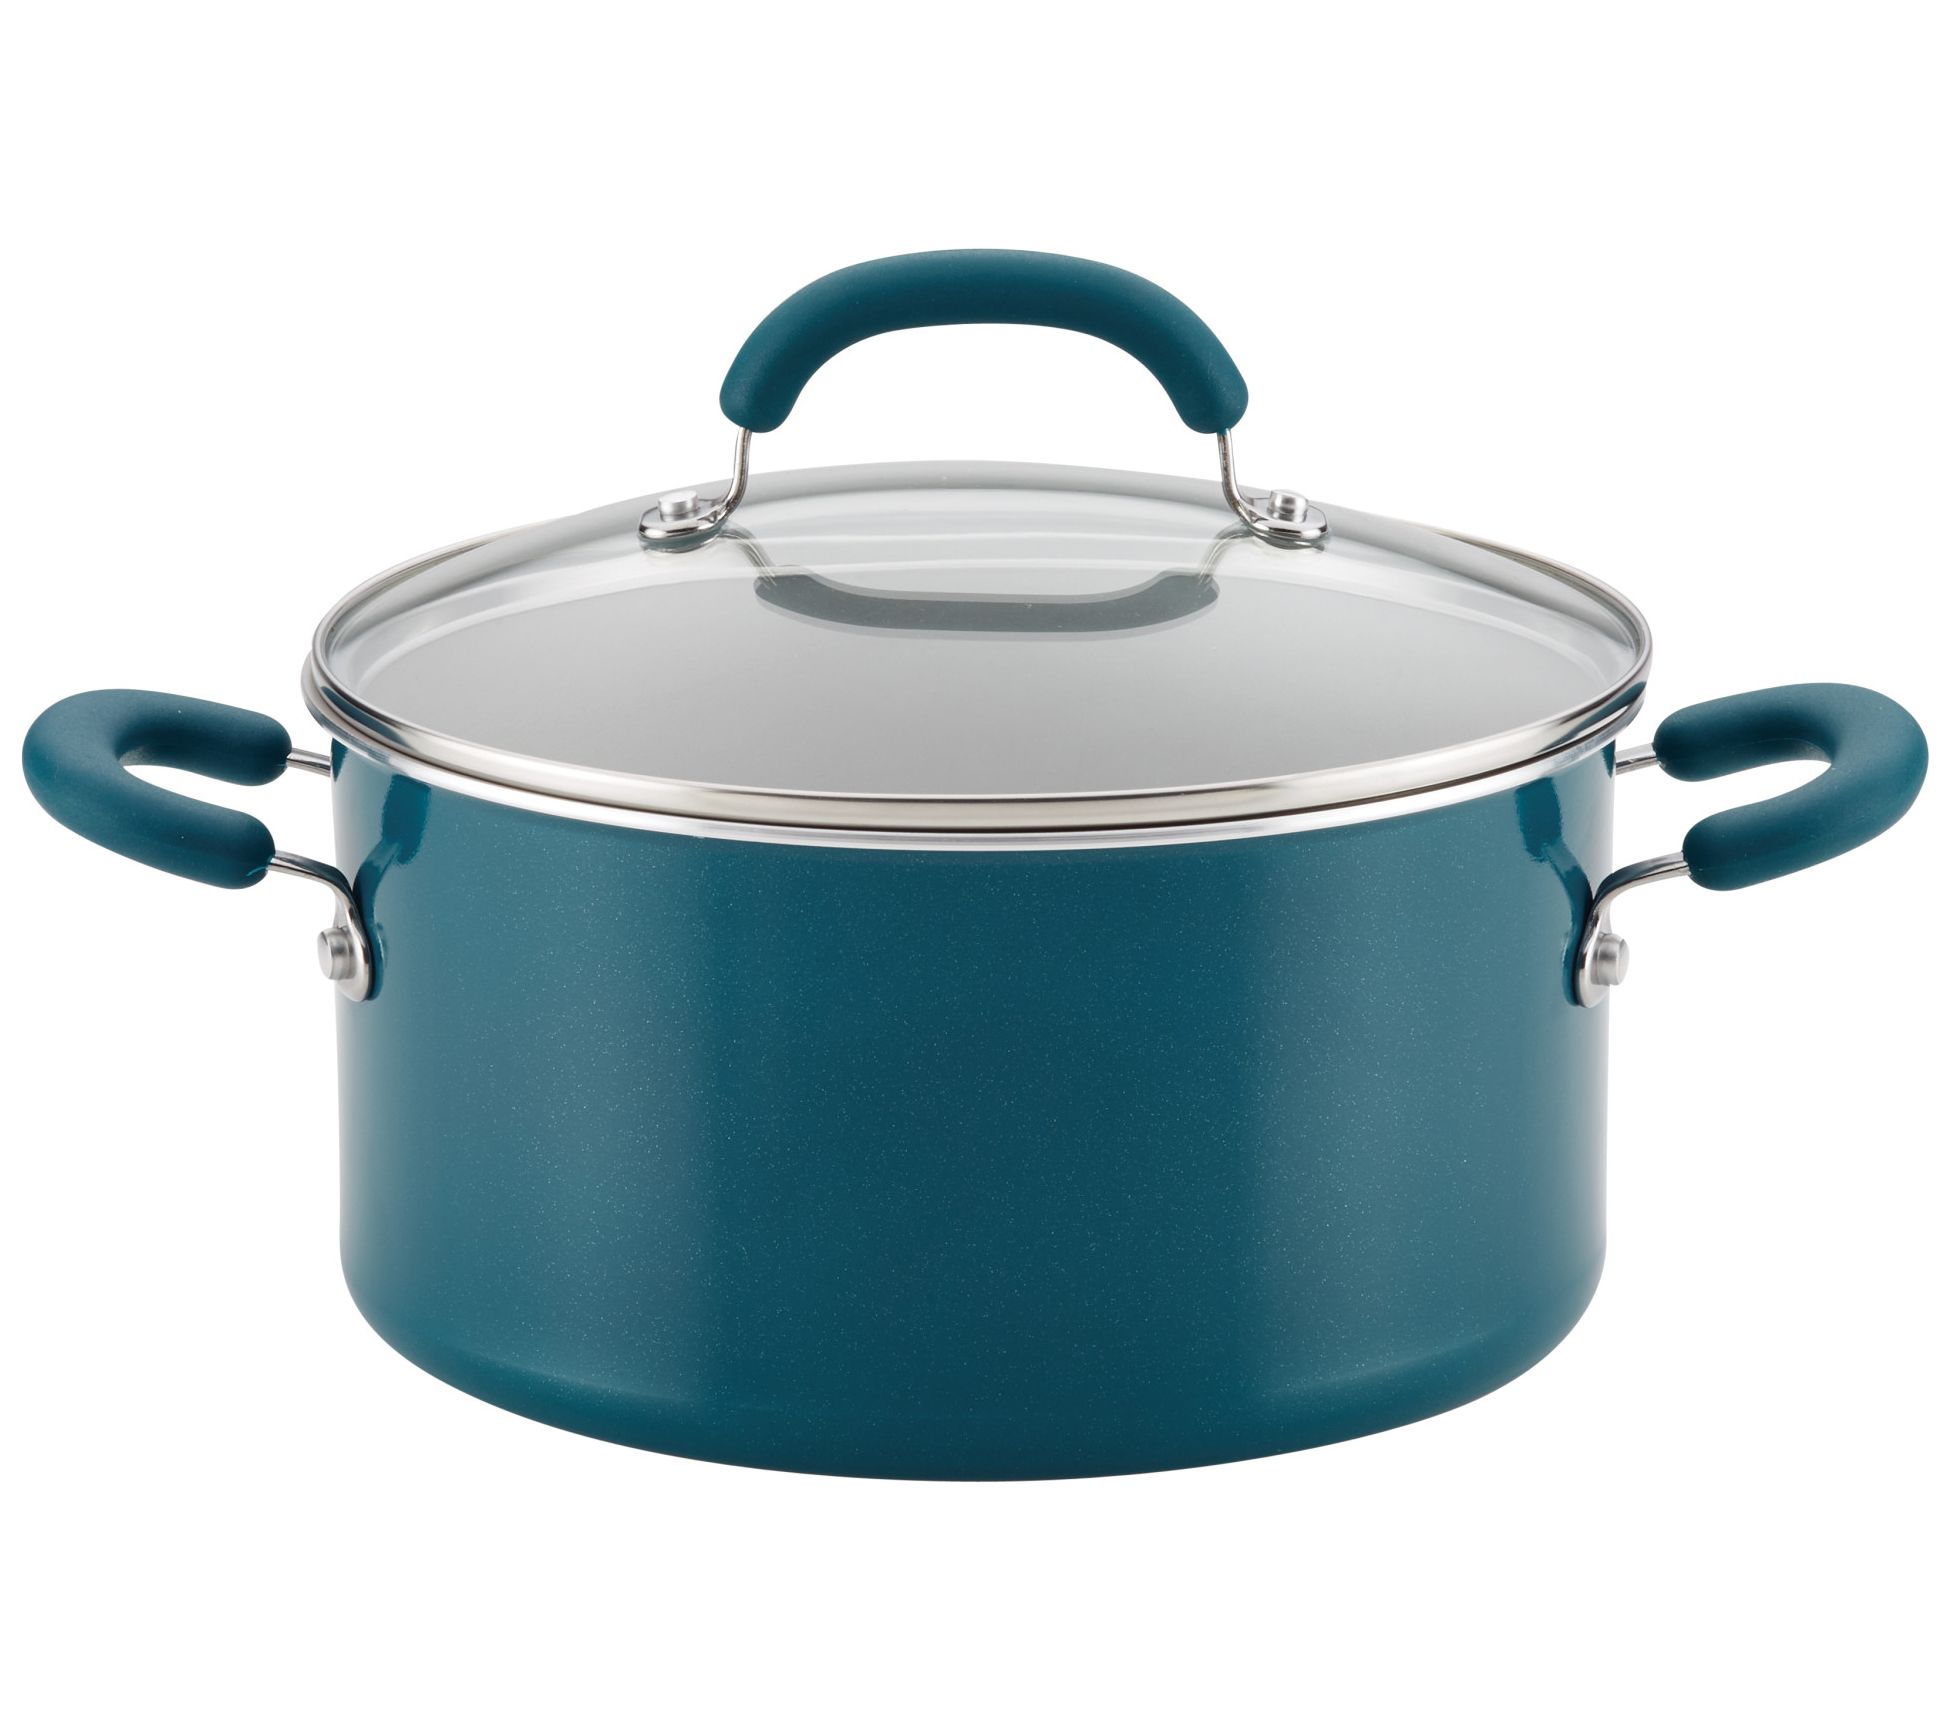 Rachael Ray Create Delicious Nonstick Deep Skillets - Teal, 2 pc